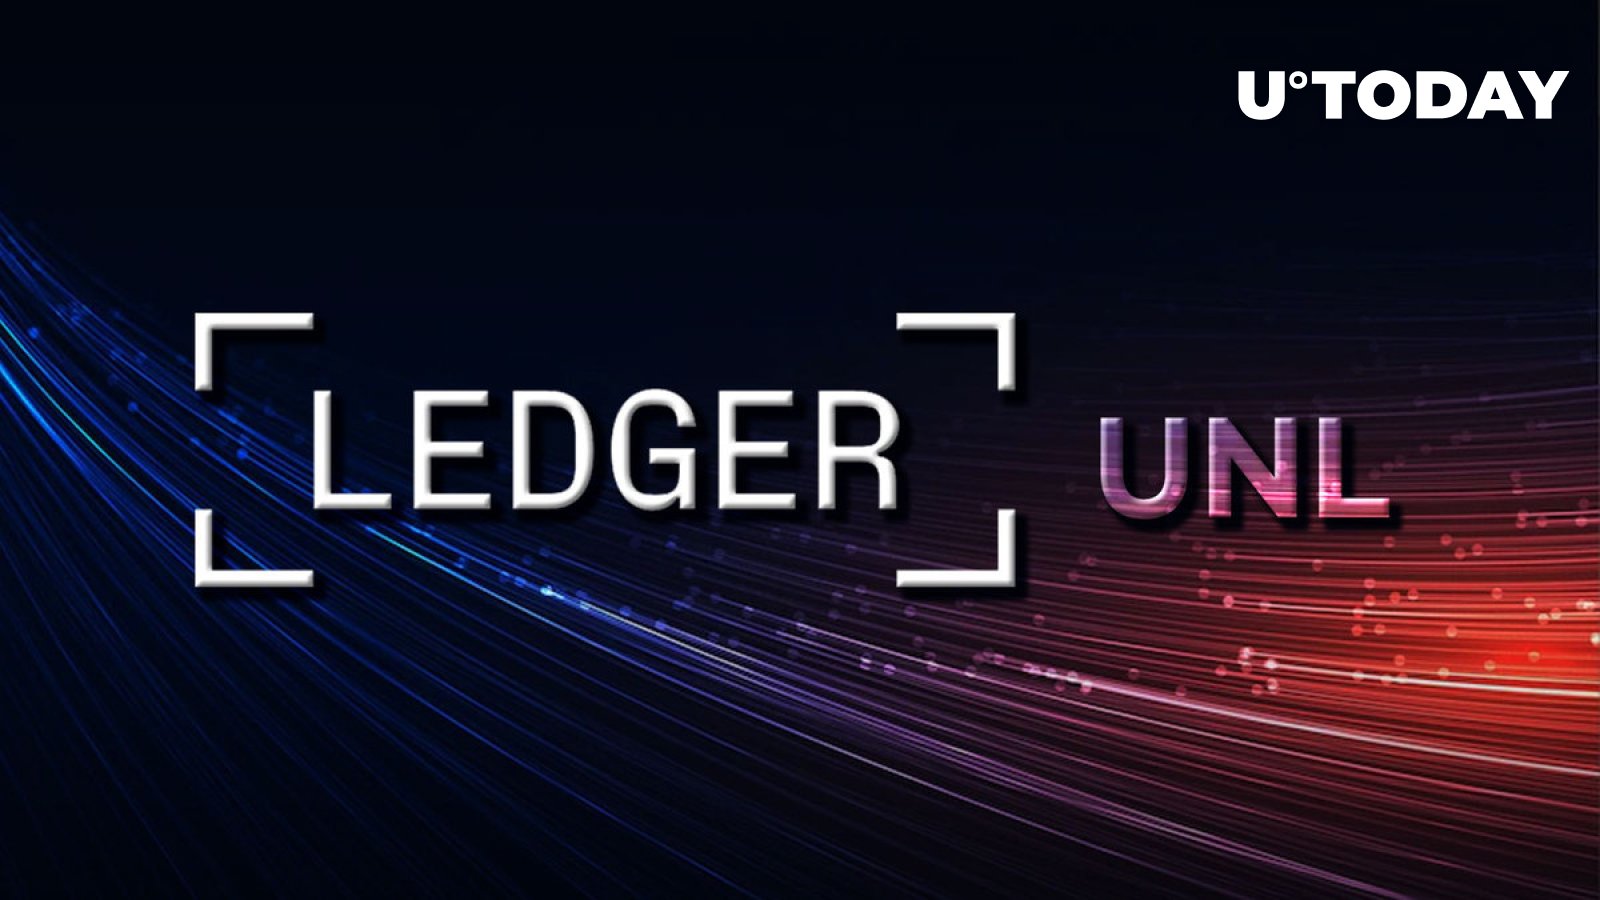 xrp-ledger-updated-its-unl-what-does-this-mean